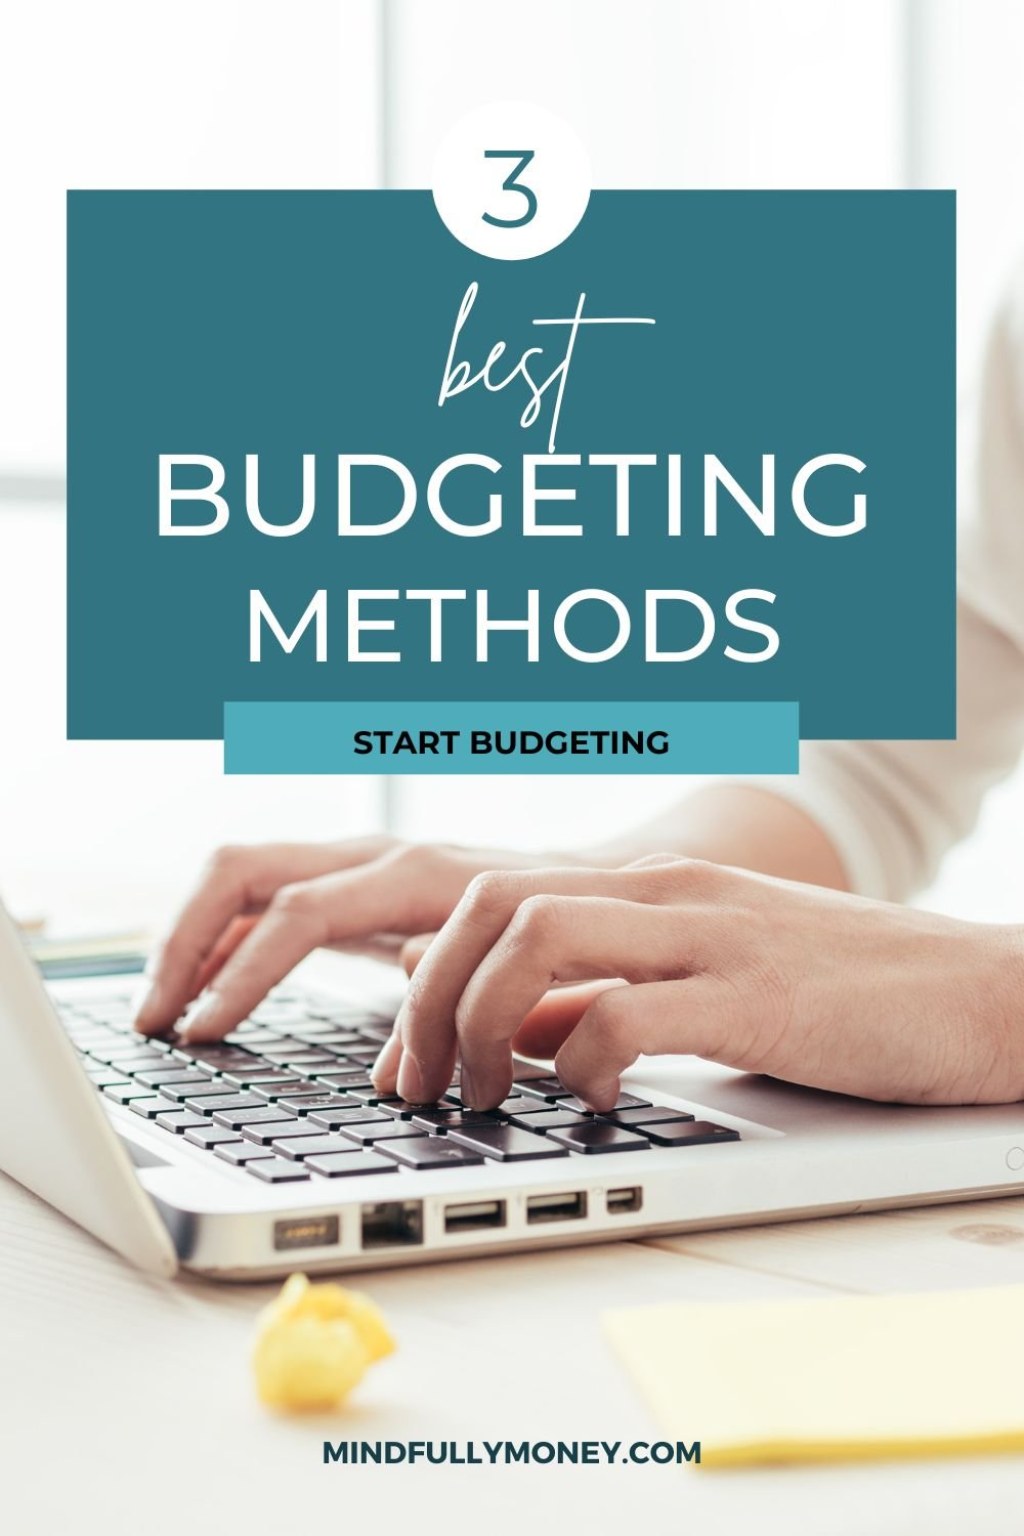 3 budgeting methods - The  Best Budgeting Methods — Mindfully Money  Money Expert and